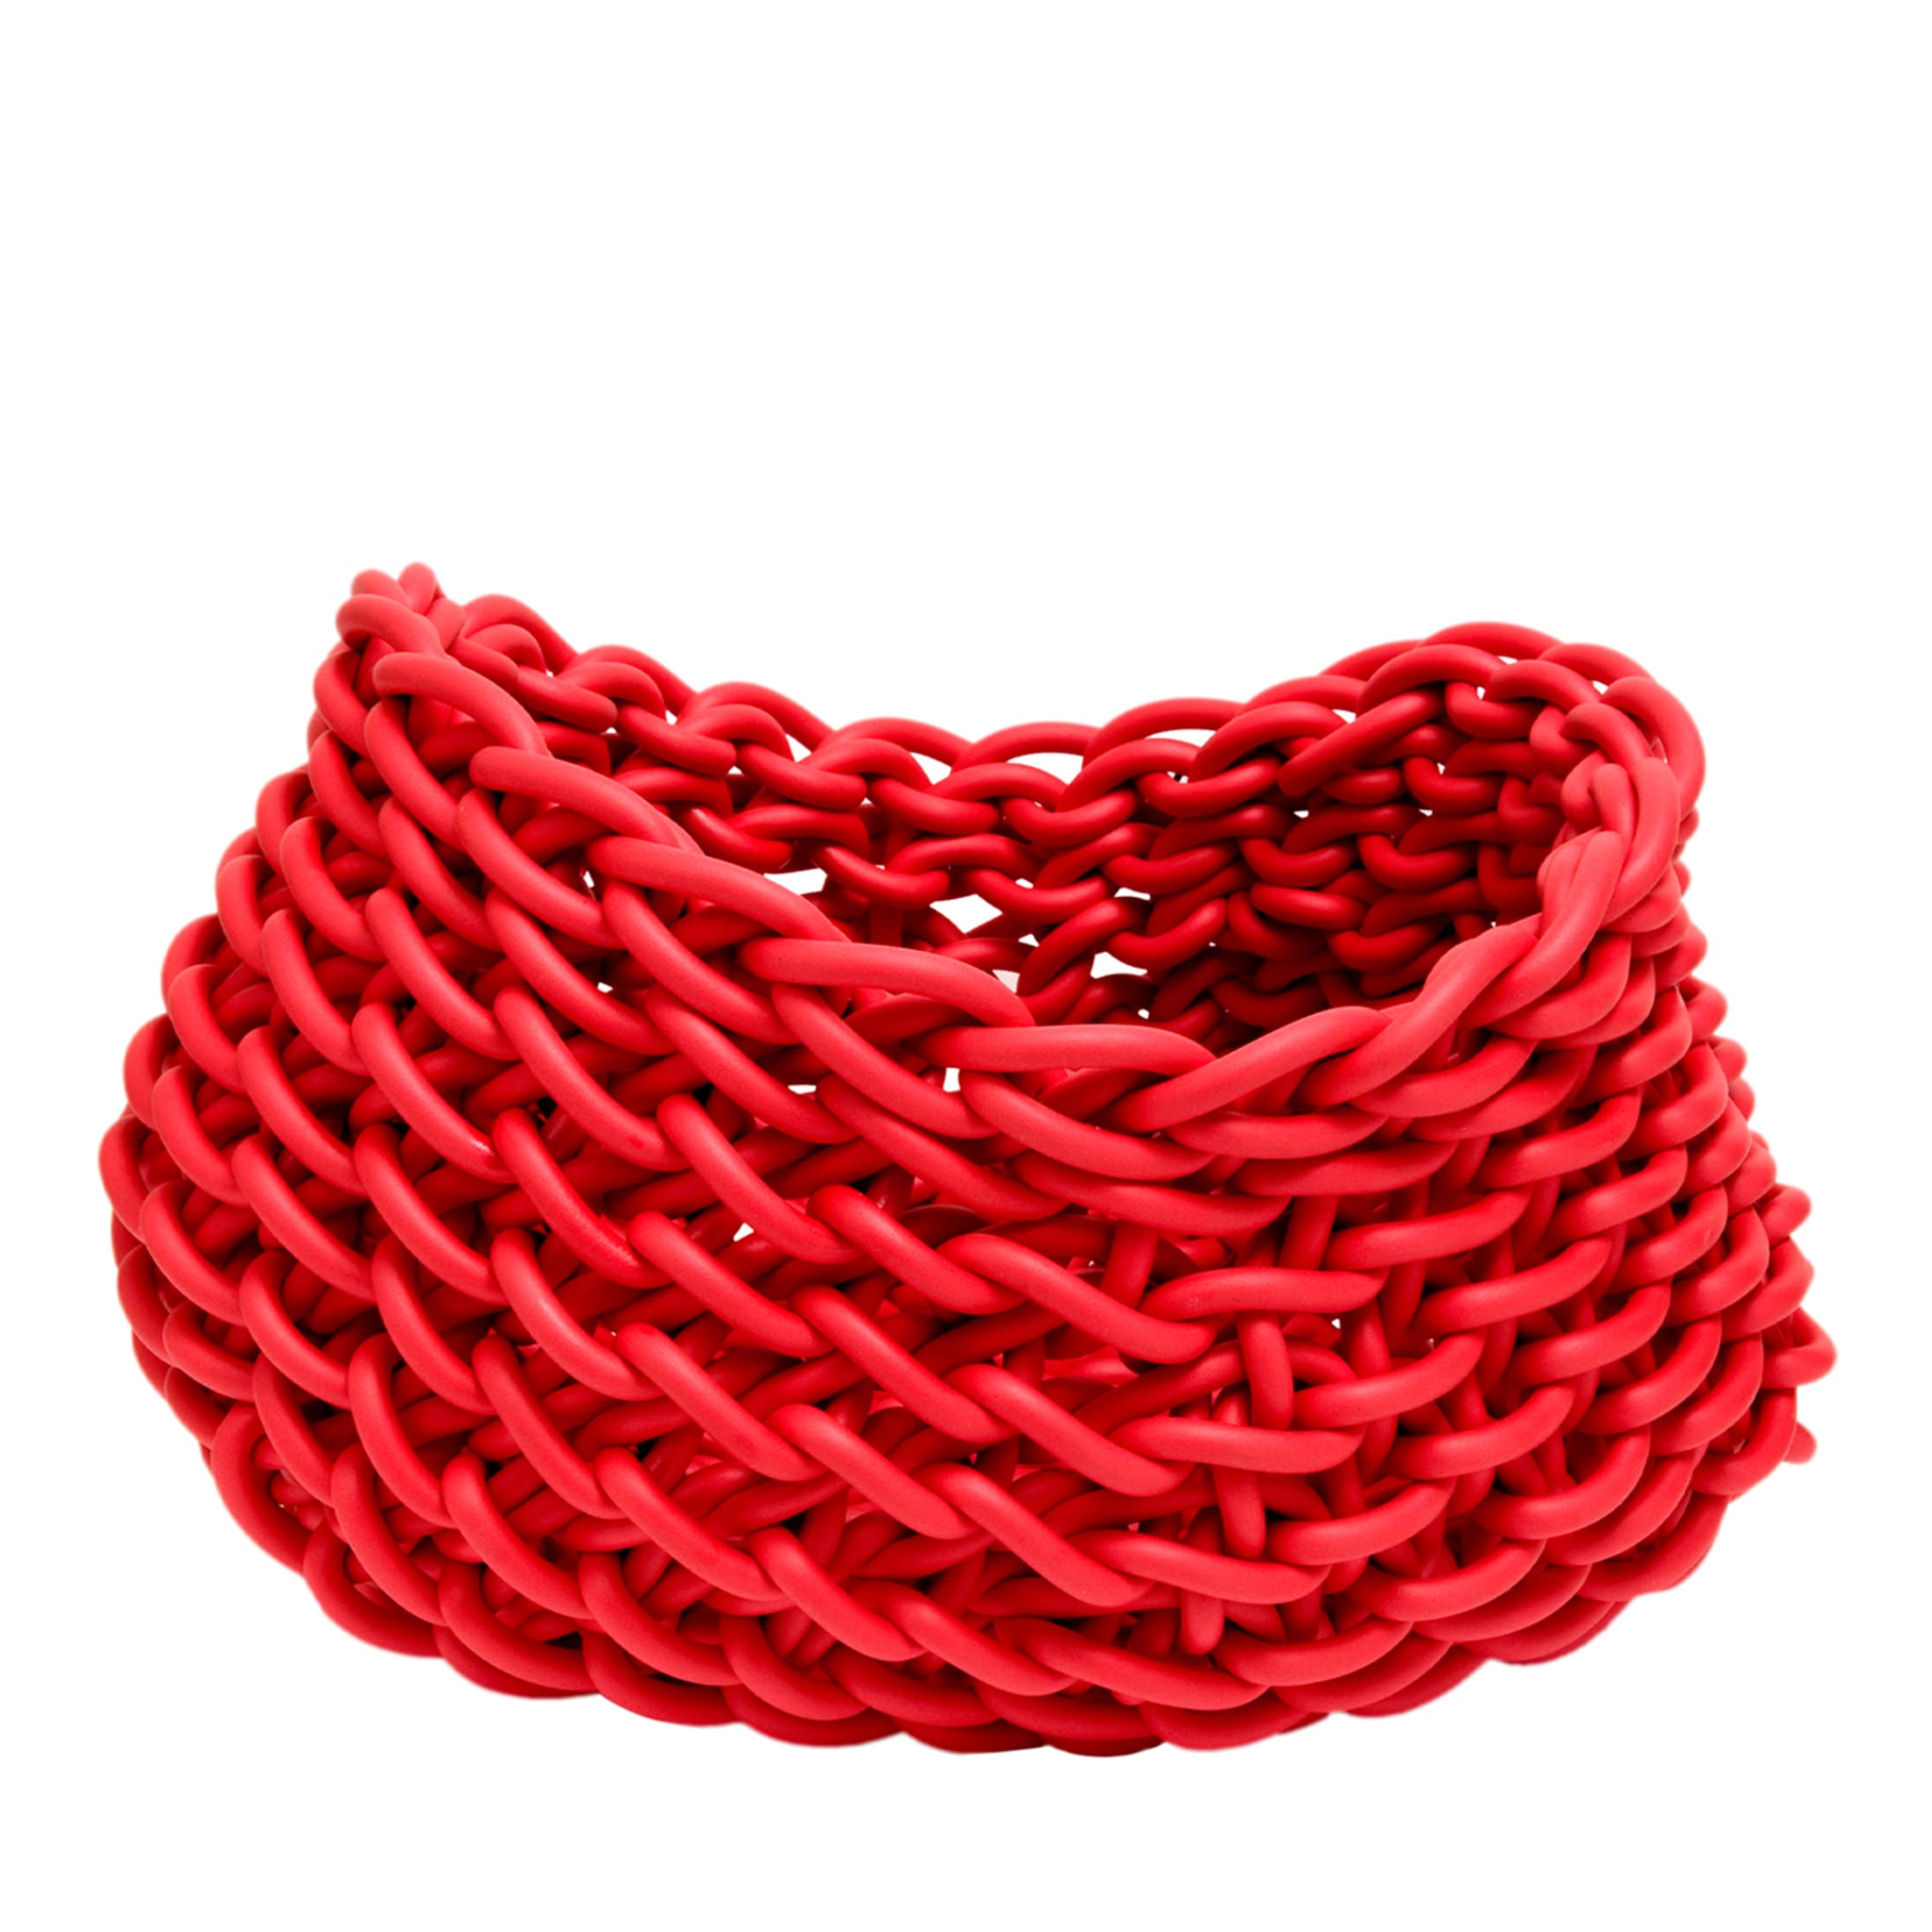 Barca Red Basket #2 by Rosanna Contadini - Main view